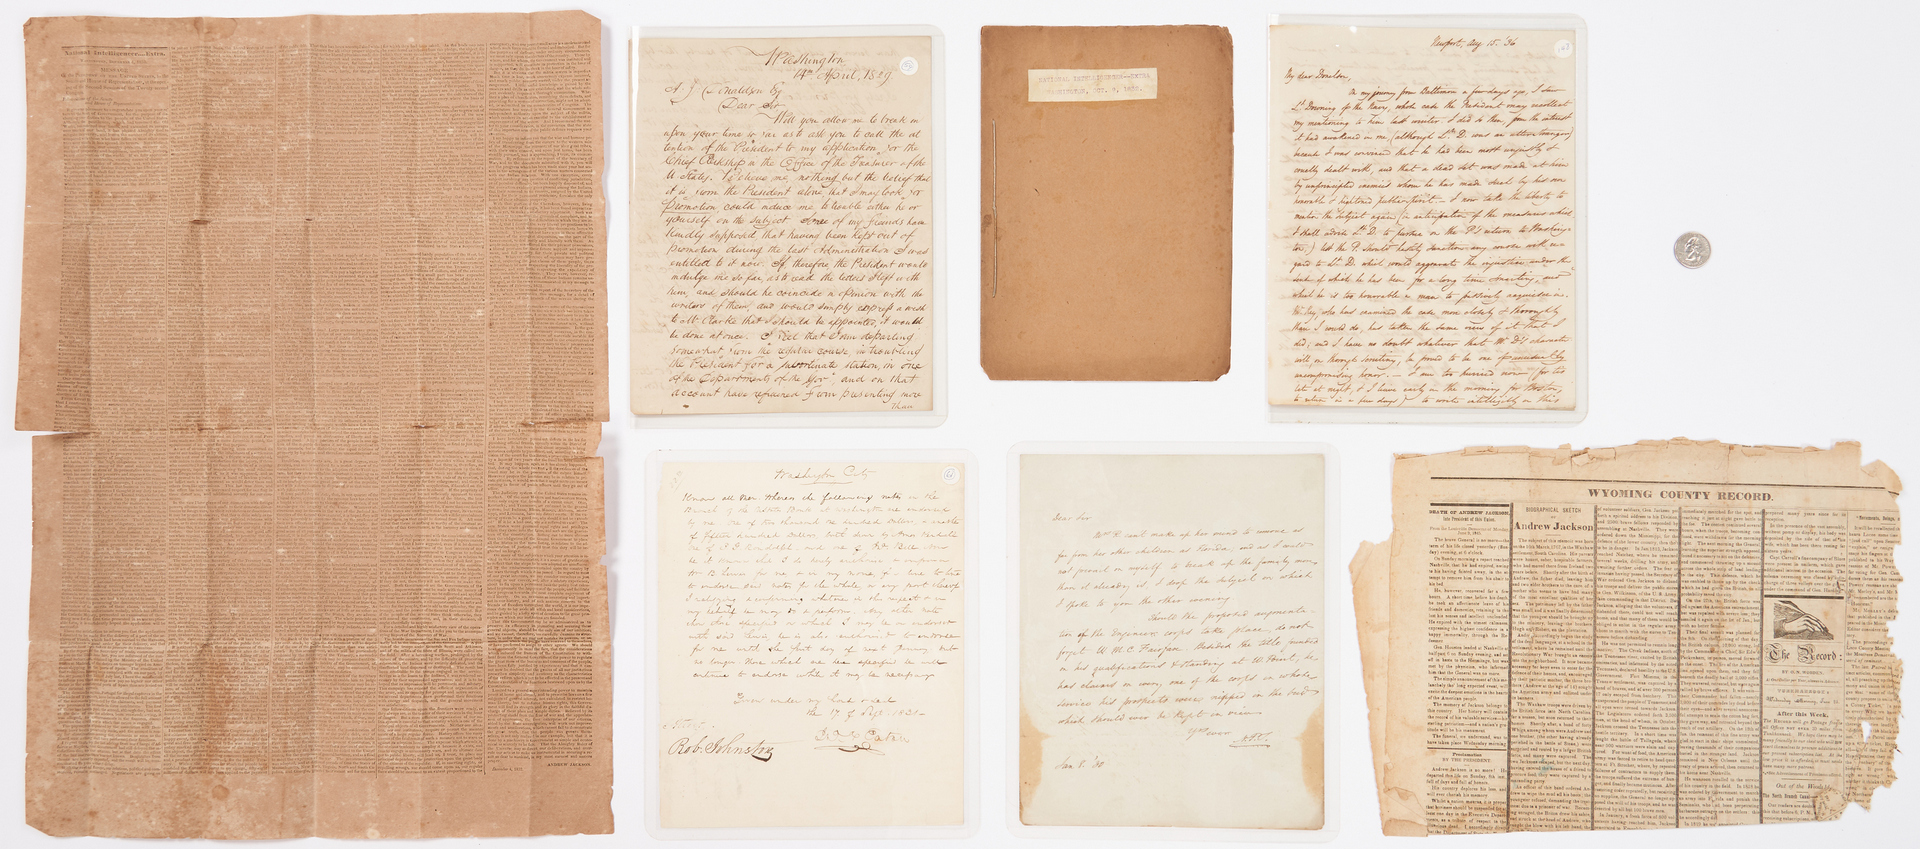 Lot 601: 3 Andrew Jackson related letters plus printed material, 7 items total